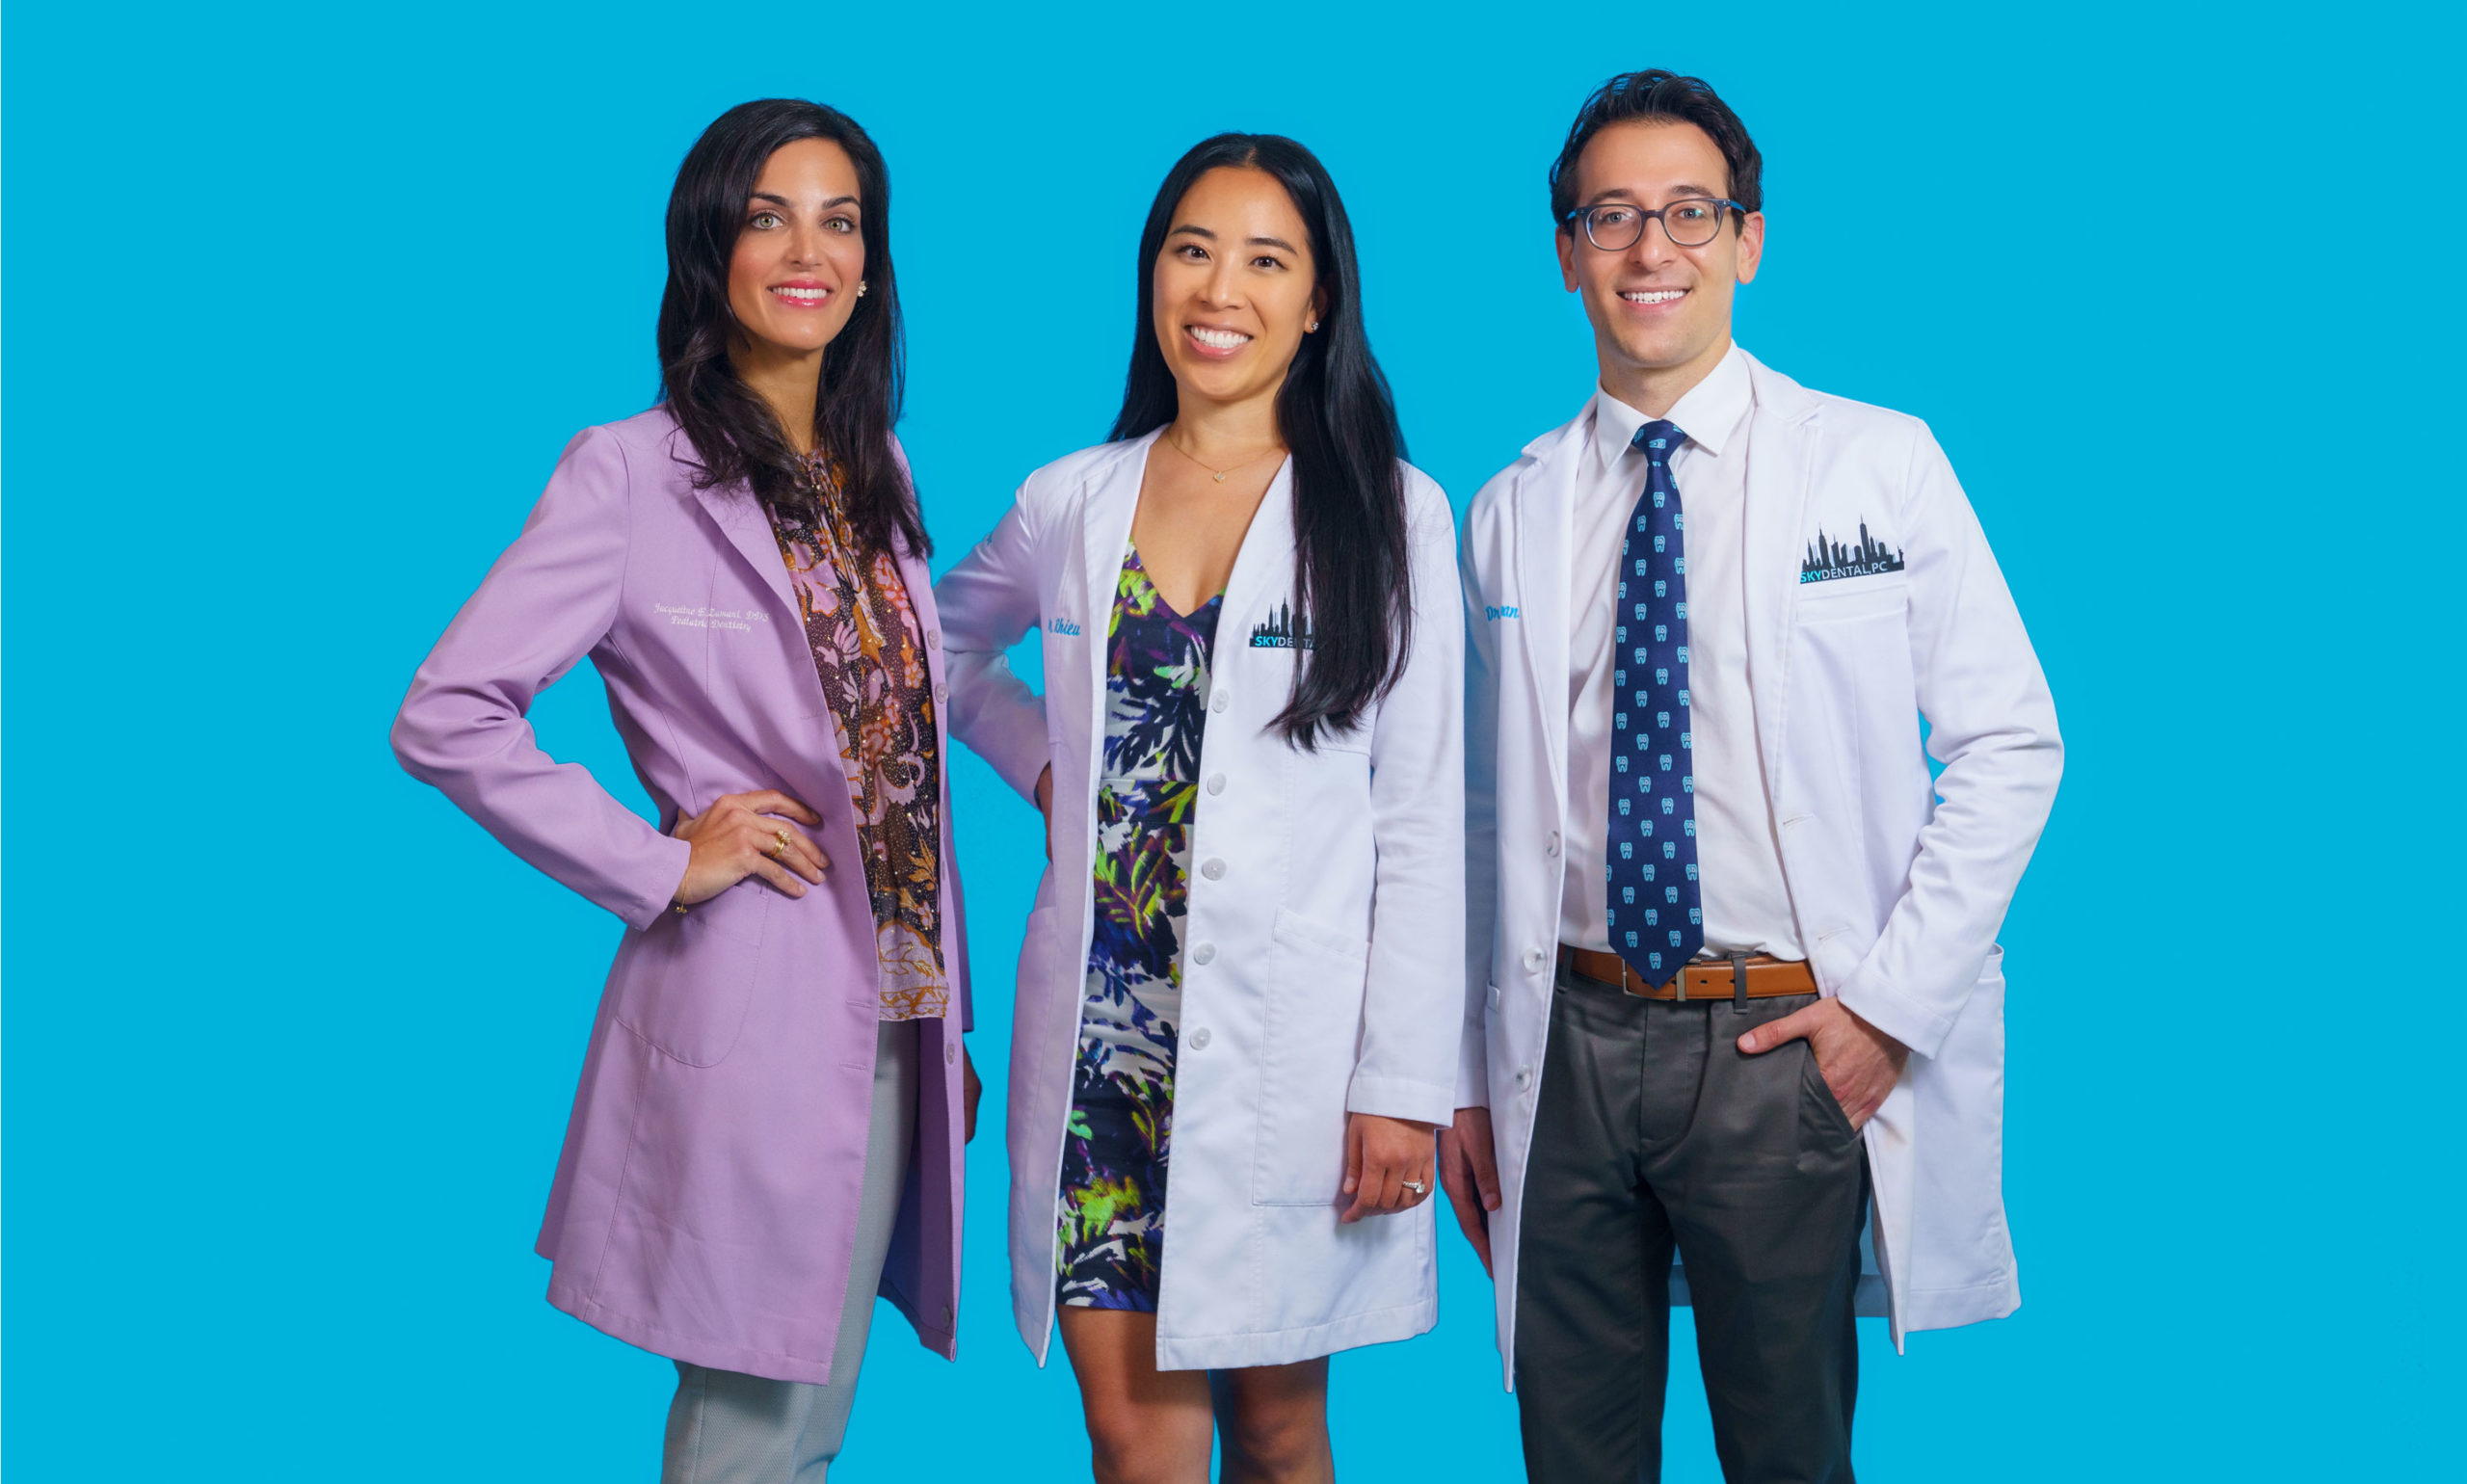 Sky Dental Dentists against a sky-blue background. Left to right: Dr. Jacqueline Zamani, Dr. Wonnie Rhieu, and Dr. Ross Newman